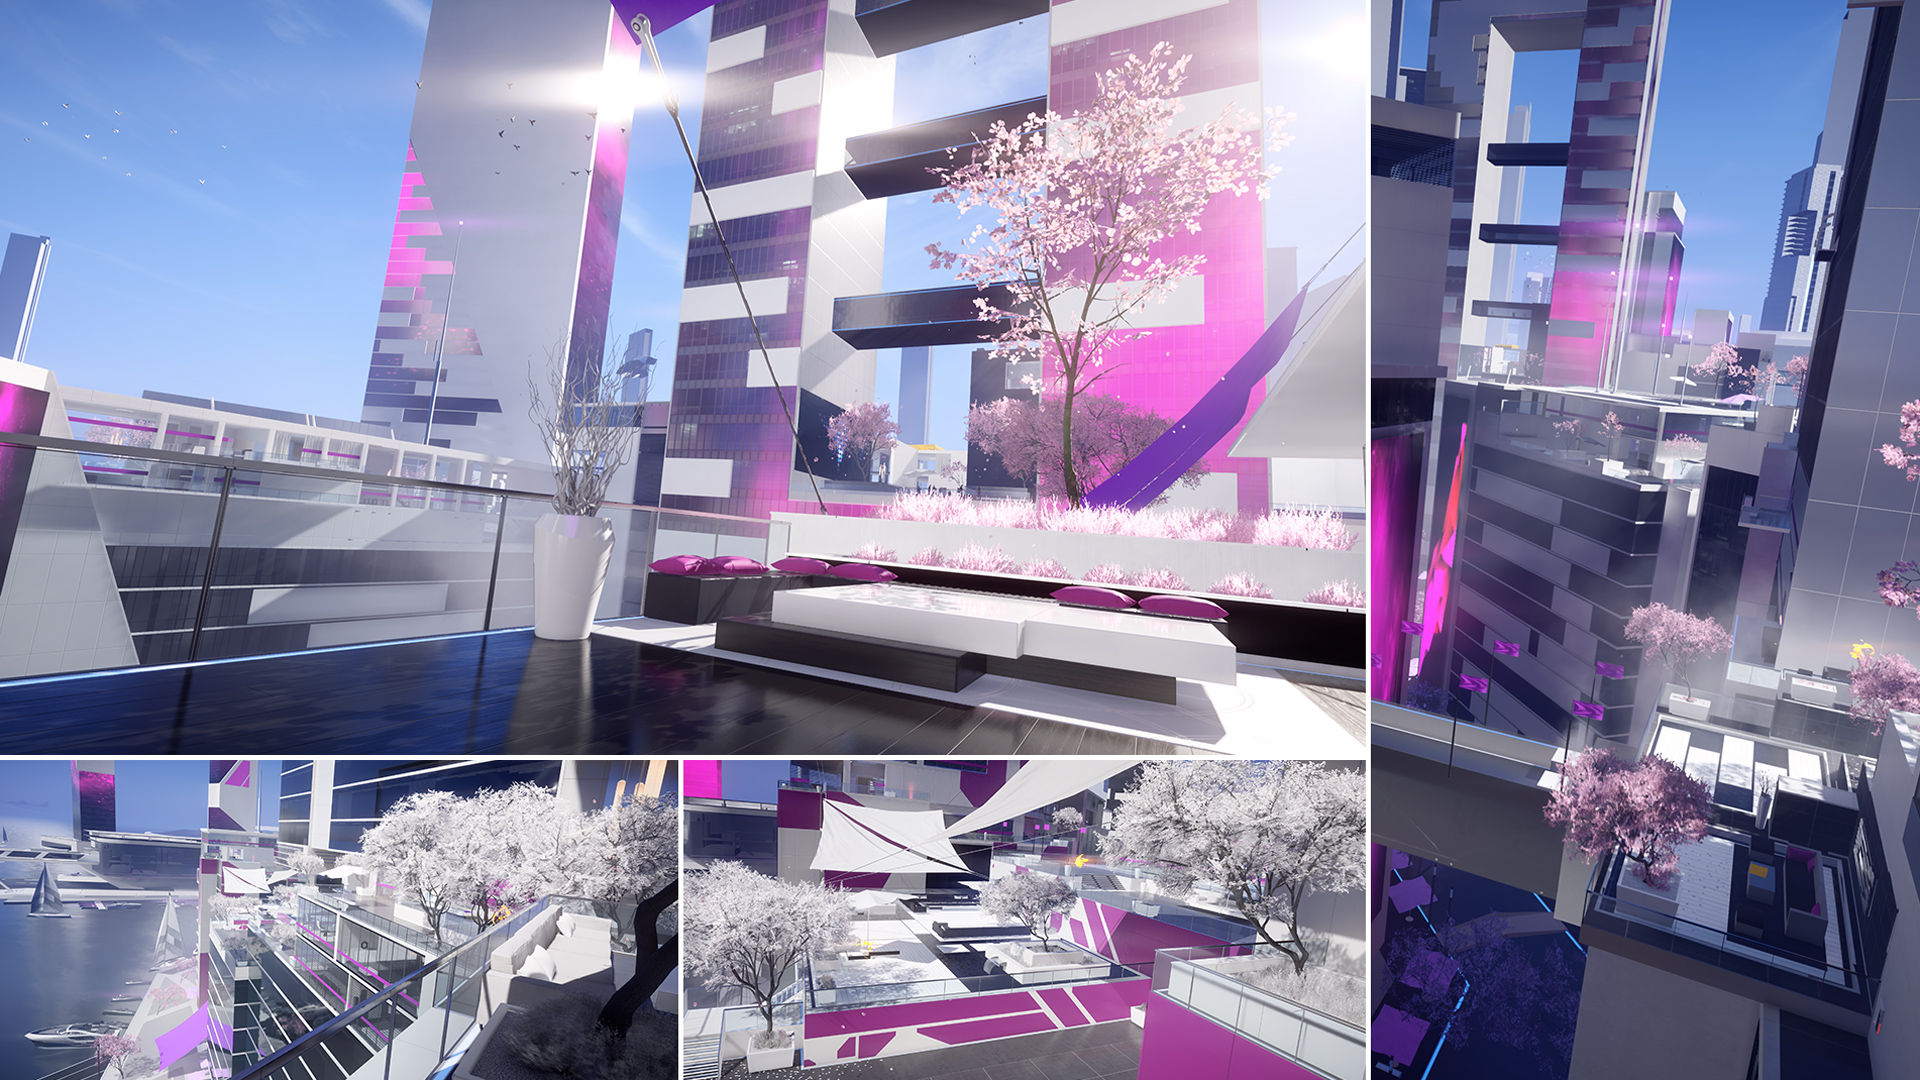 Mirror's Edge - HQ DLC Trailer - High quality stream and download -  Gamersyde